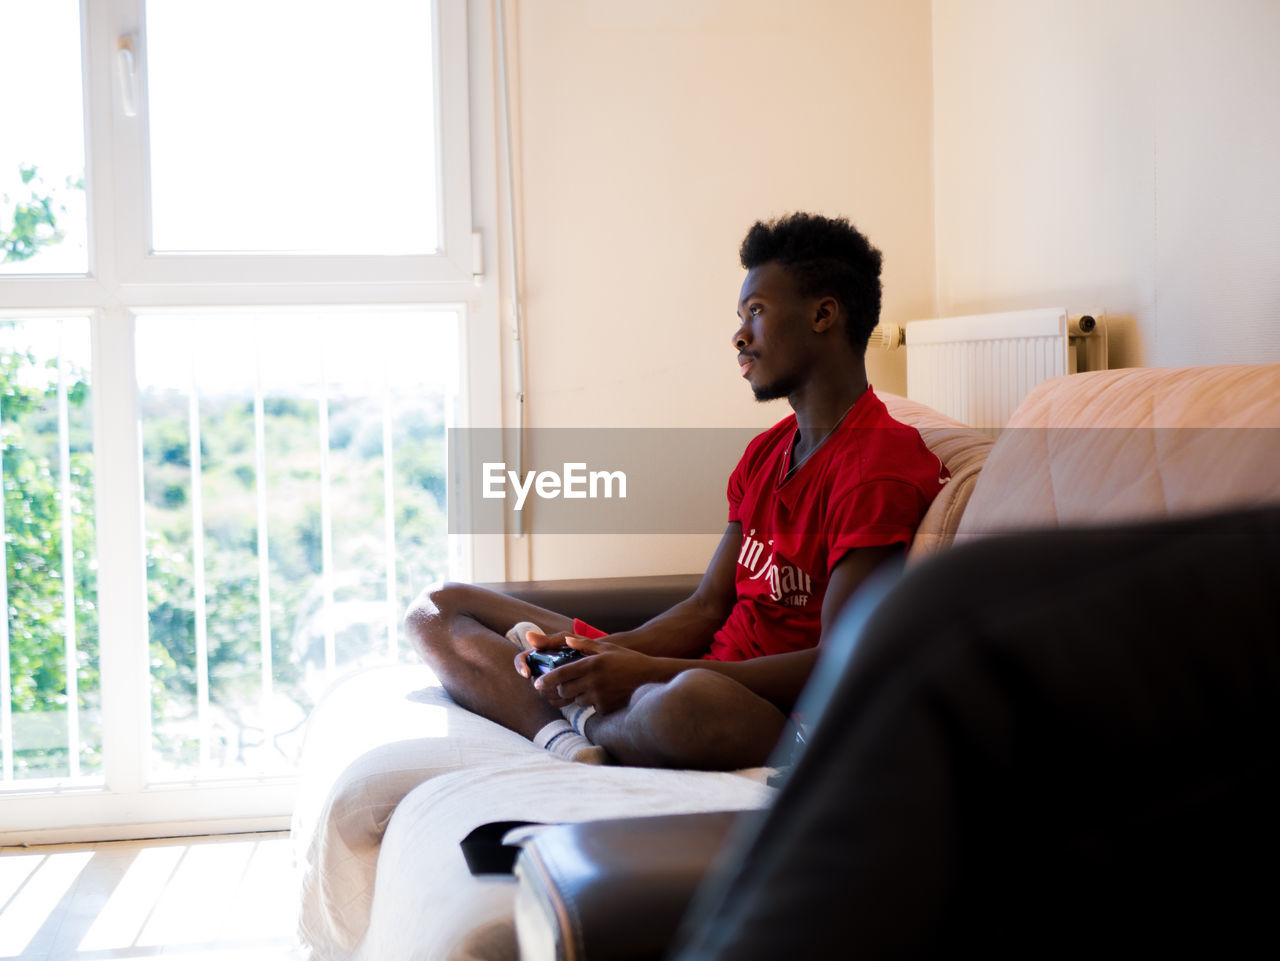 Young man using wireless playstation pad while sitting on bed at home